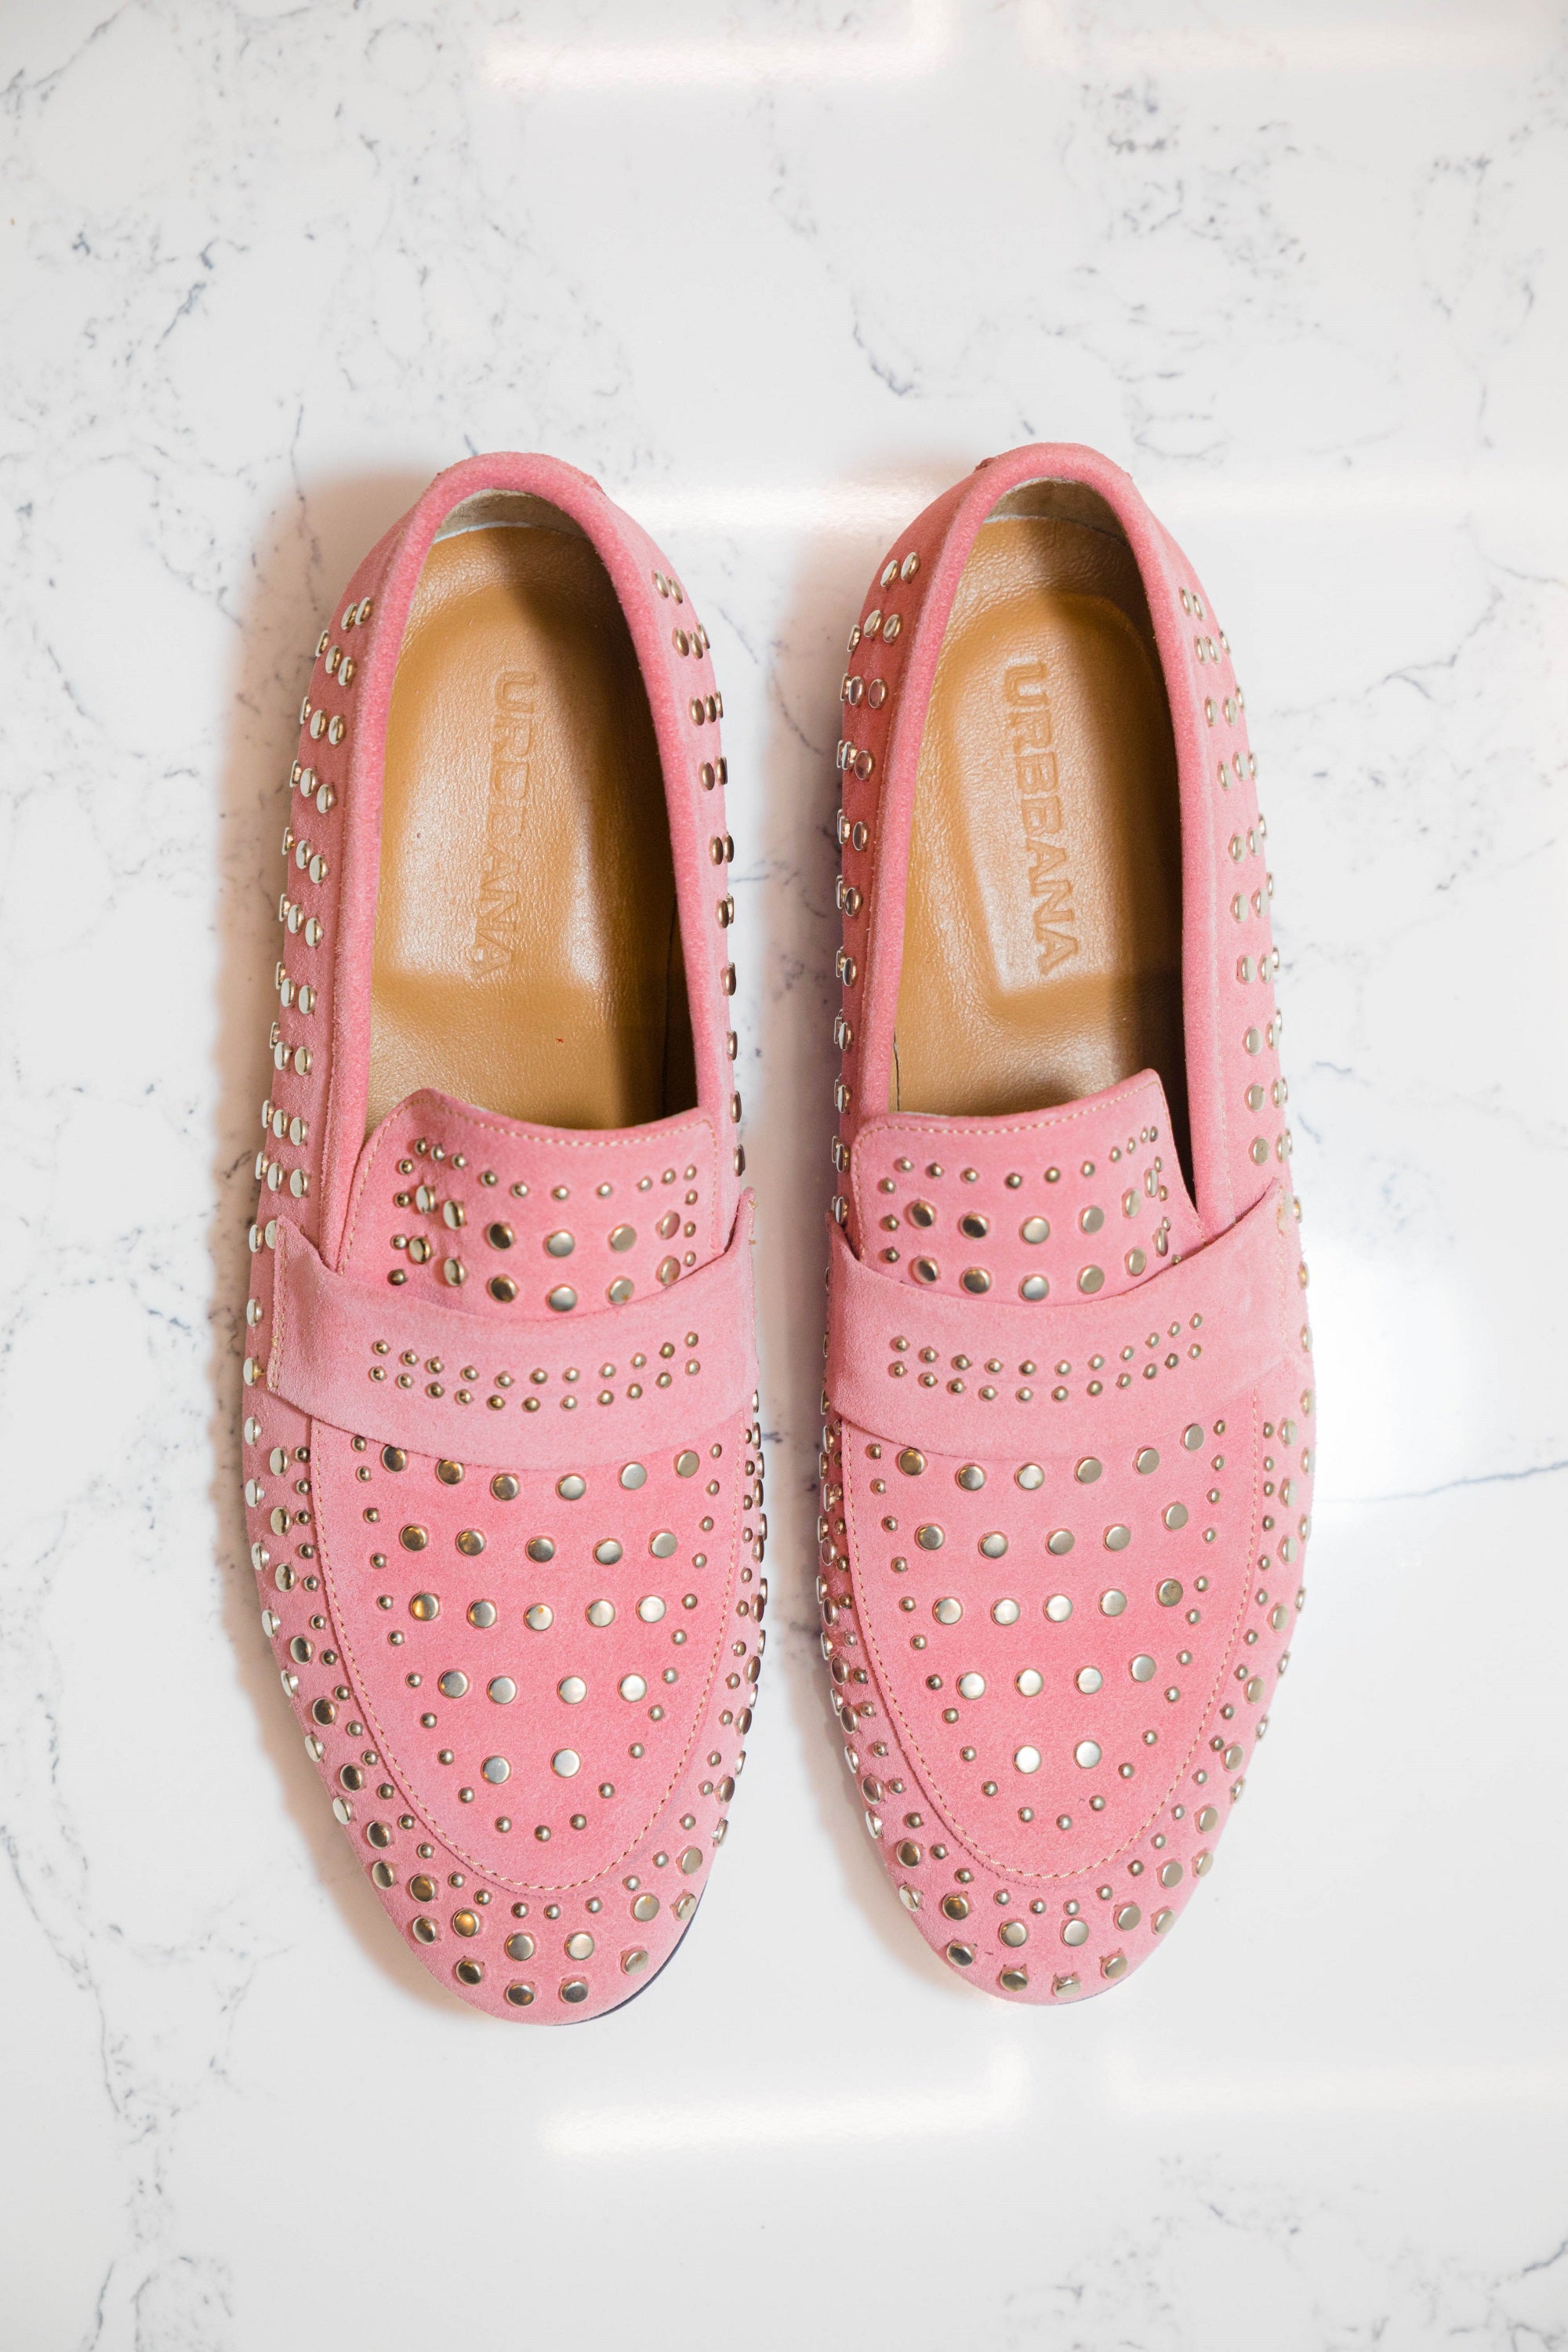 The Stud Loafers - Pink - Loafers by Urbbana